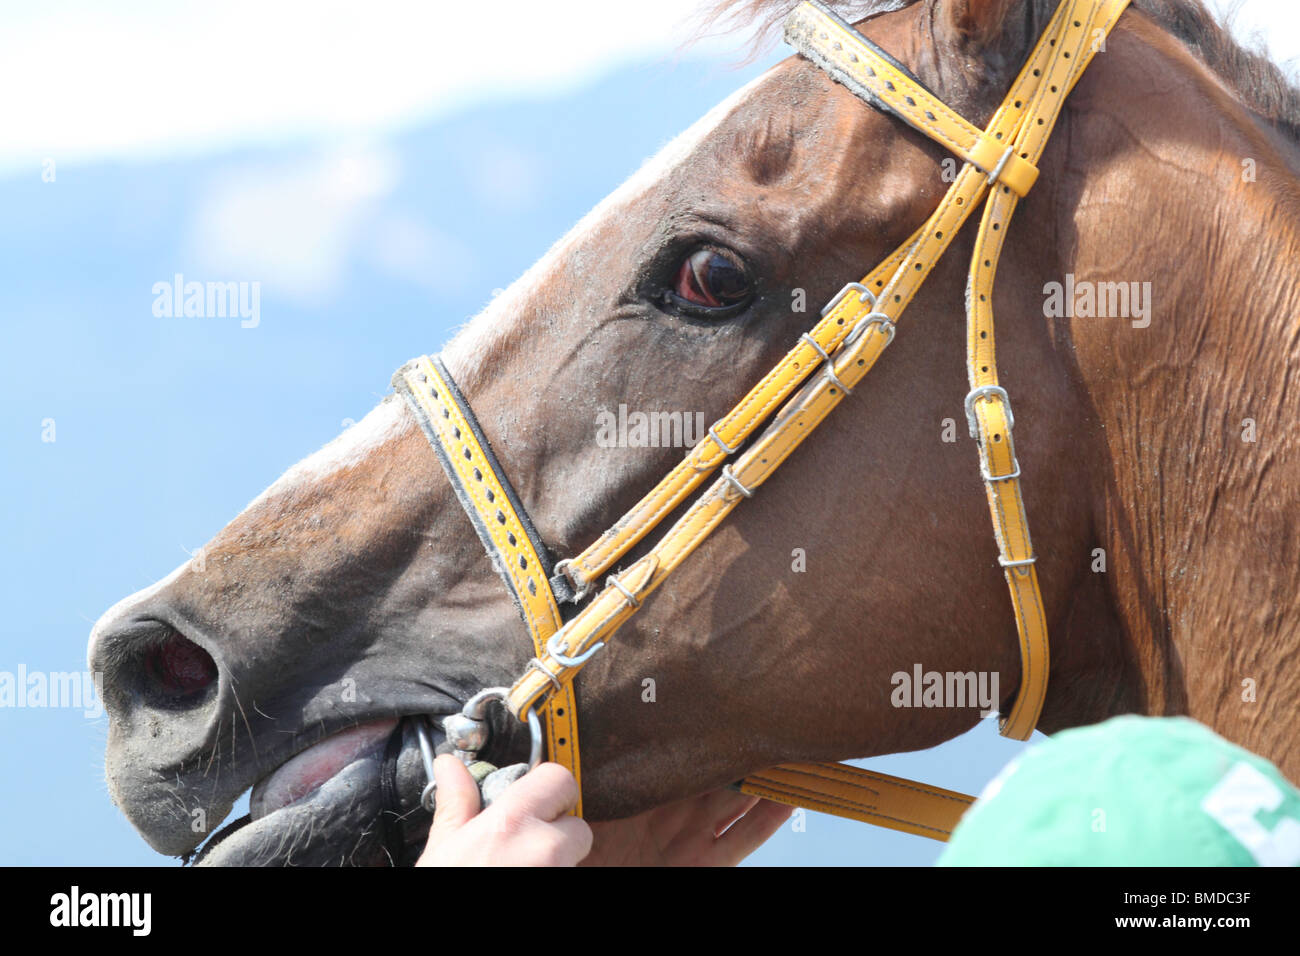 Race horse with blood-shot eyes being held as the saddle is taken off before being led back to the barn after running a race. Stock Photo